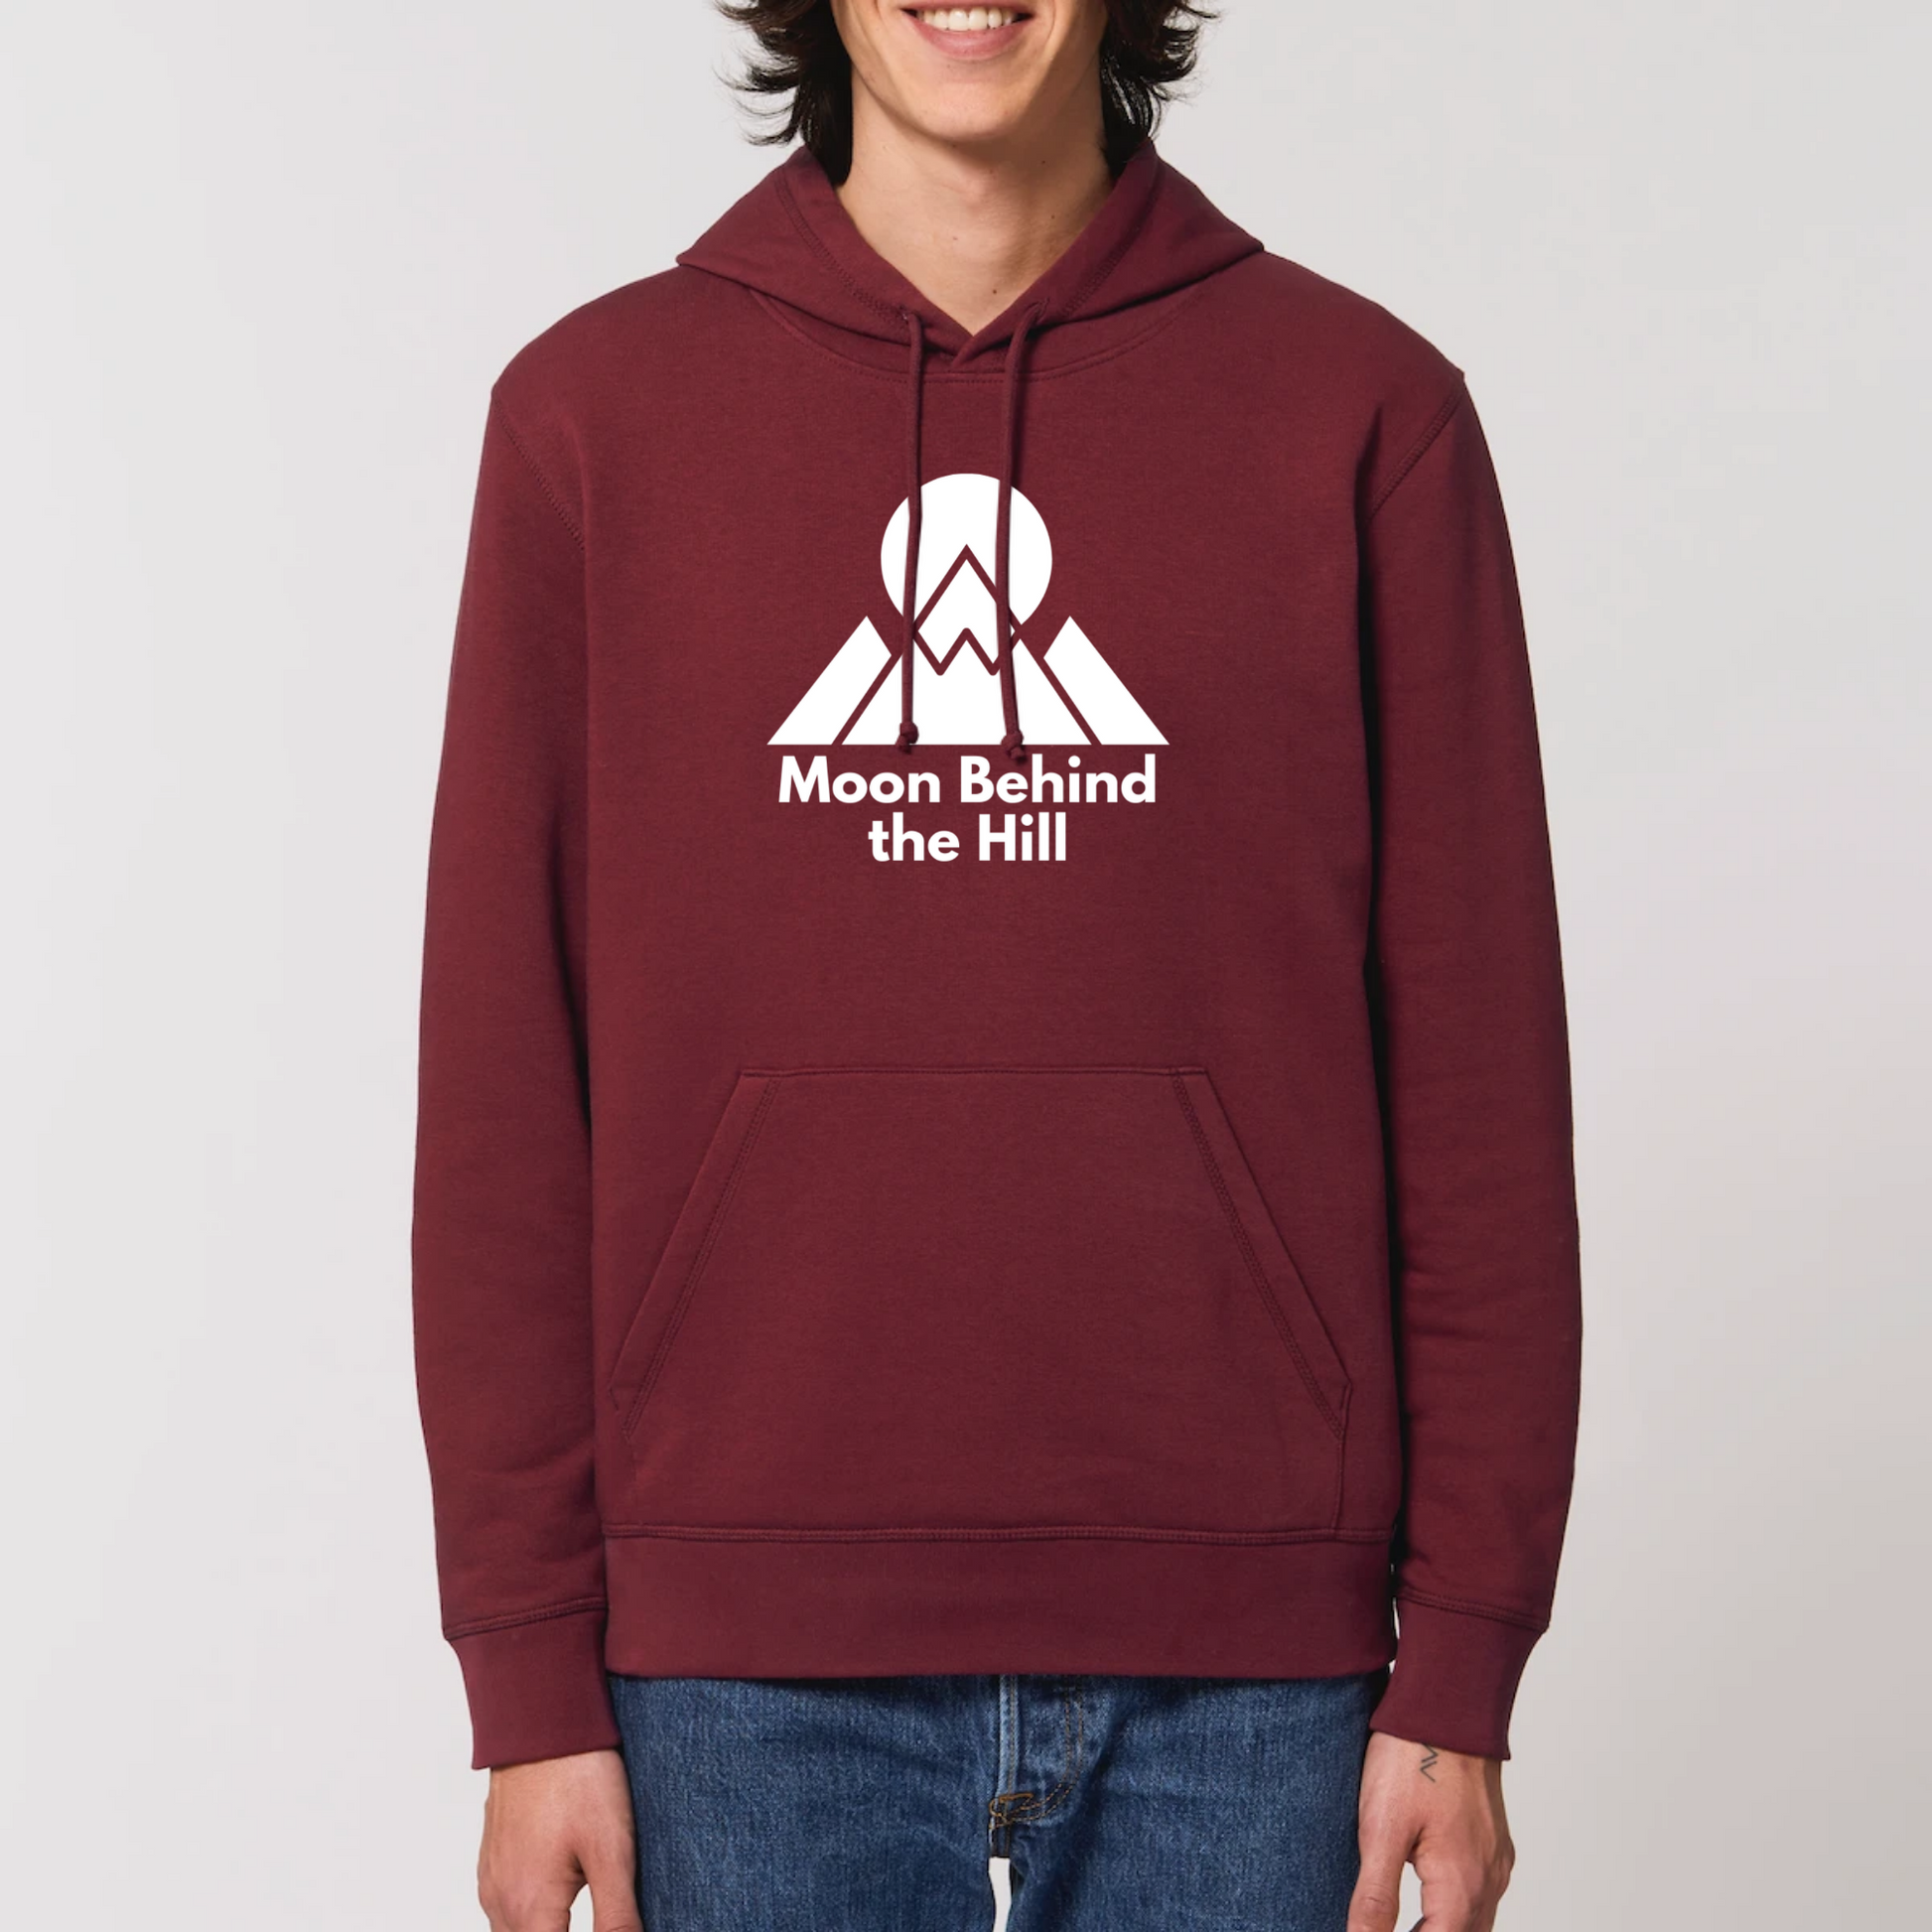 Model wearing a maroon hoodie with a Moon Behind the Hill logo print on the front